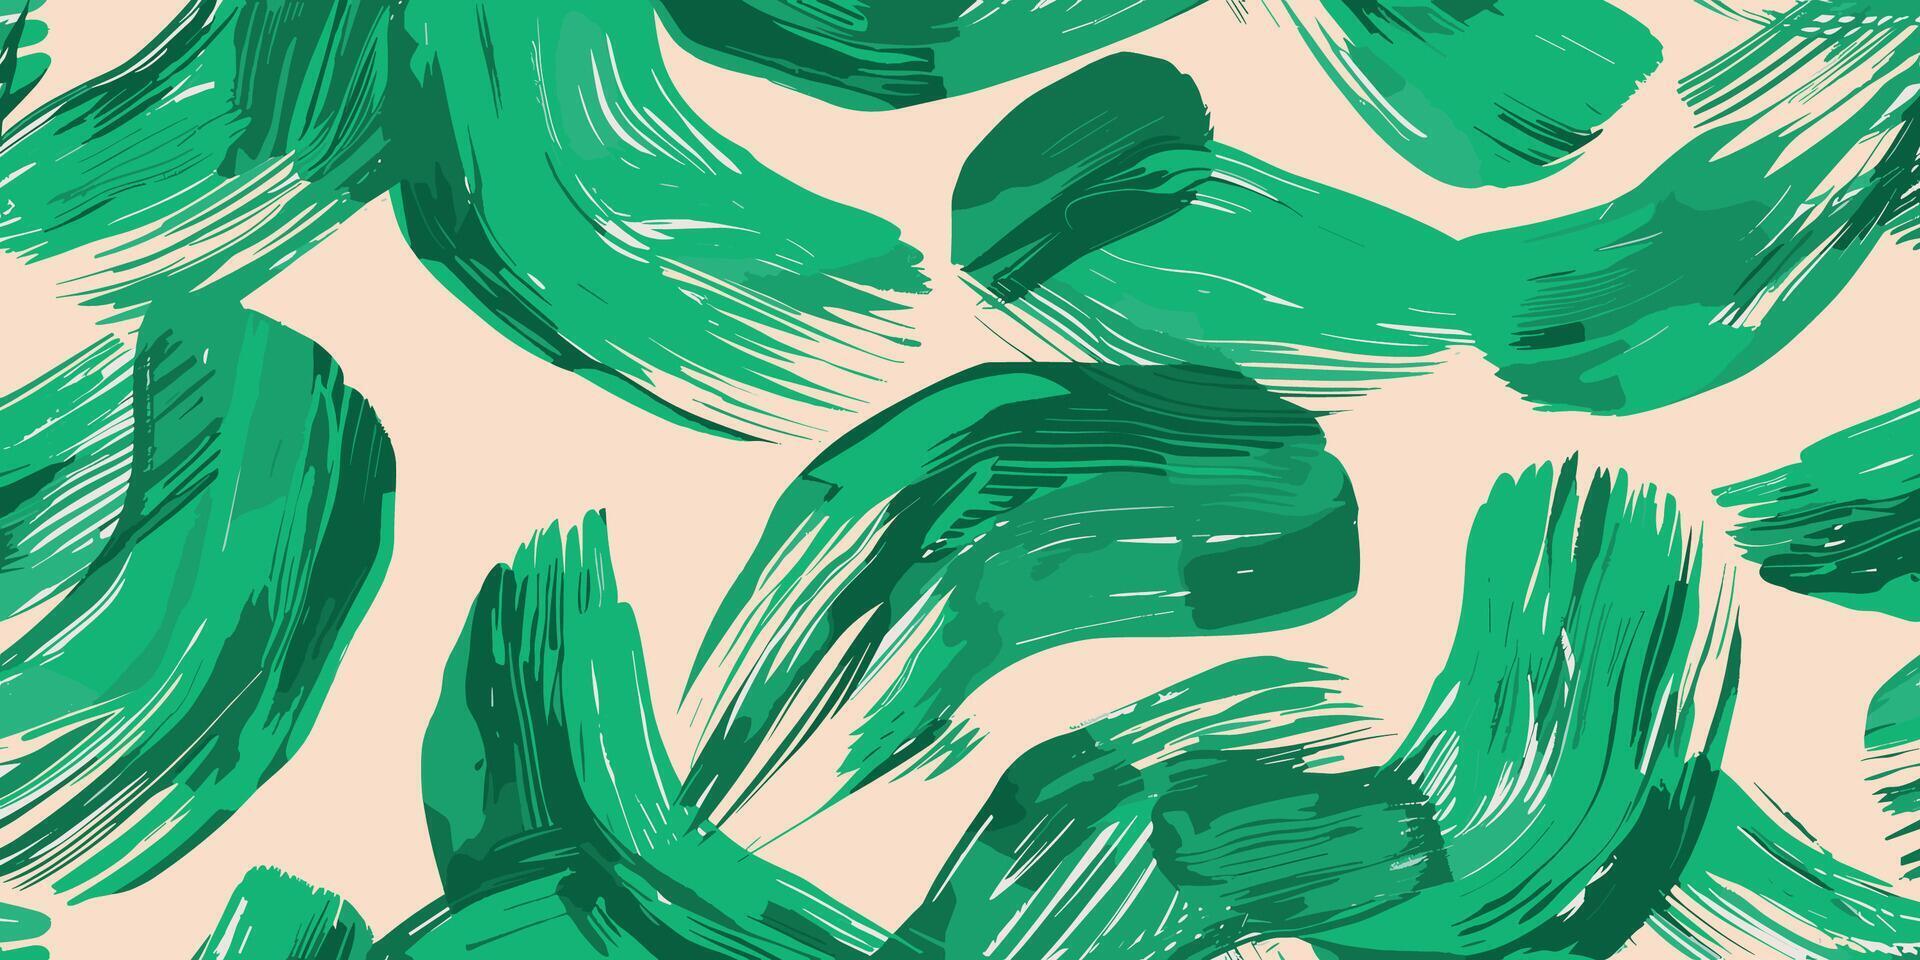 Seamless pattern with green brush strokes. Hand drawn abstract seamless pattern. Ethnic background, African flat style. Seamless Grunge fabric texture. Paint brush strokes seamless vector